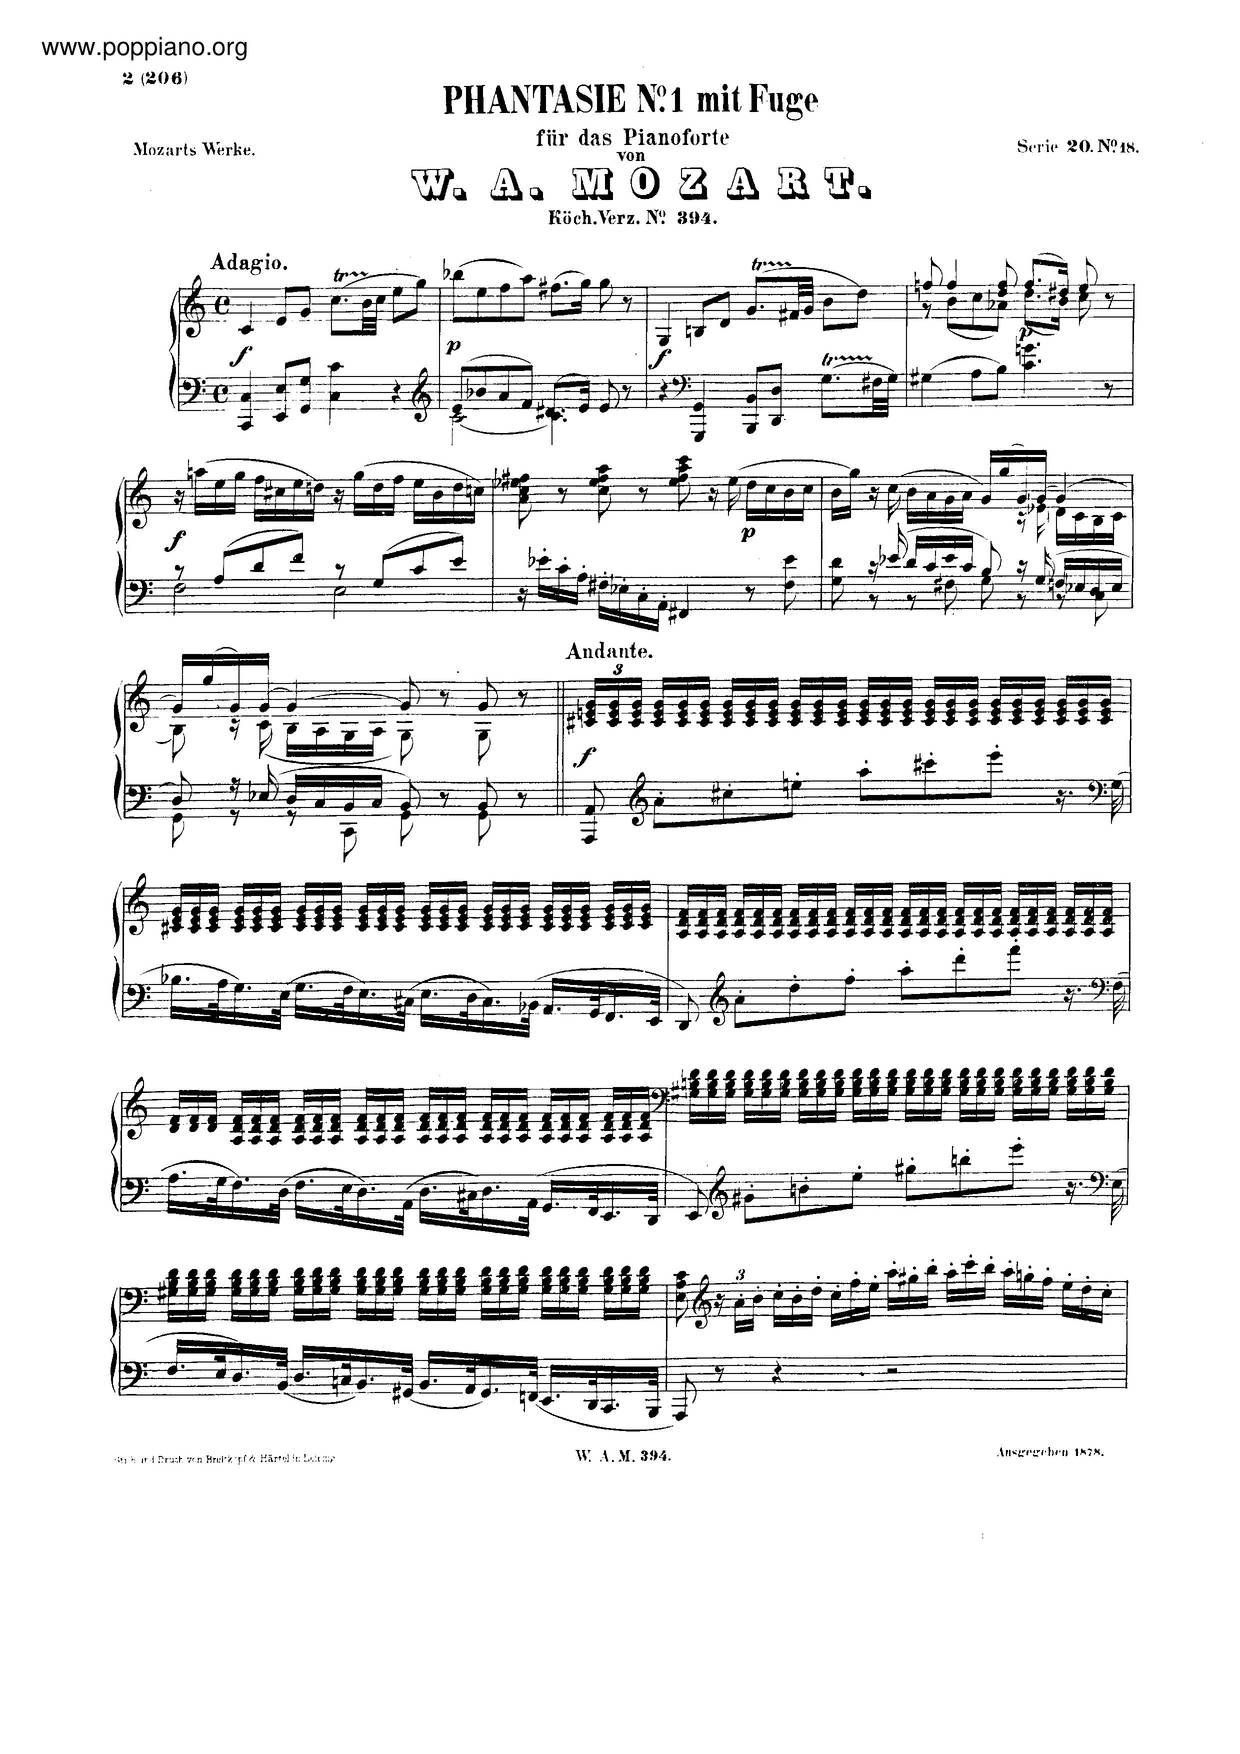 Prelude And Fugue In C Major, K. 394/383A Score